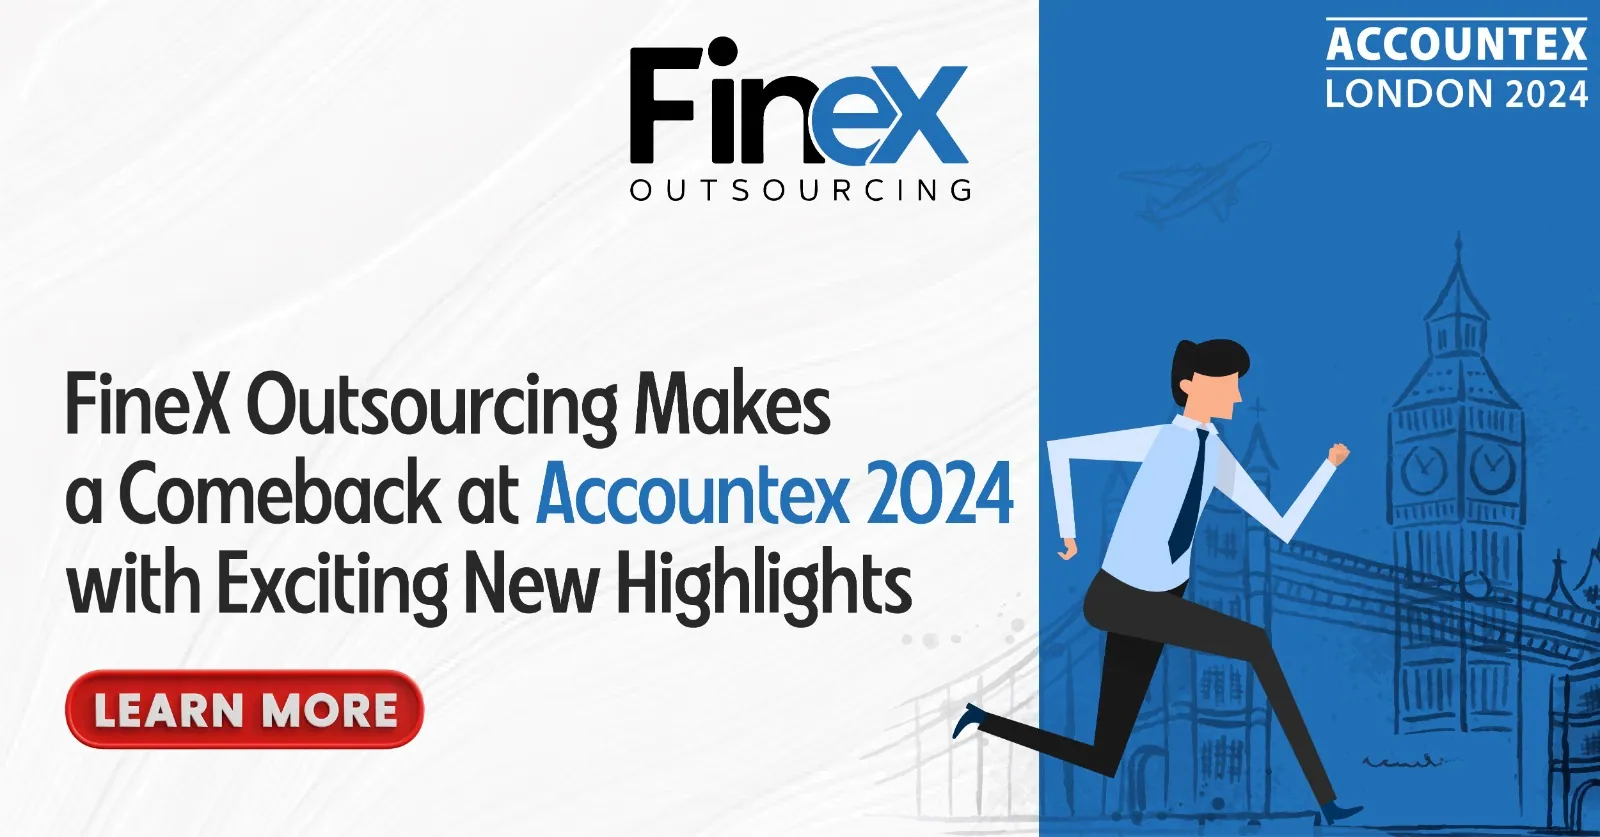 FineX Outsourcing's Exciting New Offerings at Accountex 2024: A Sneak Peek